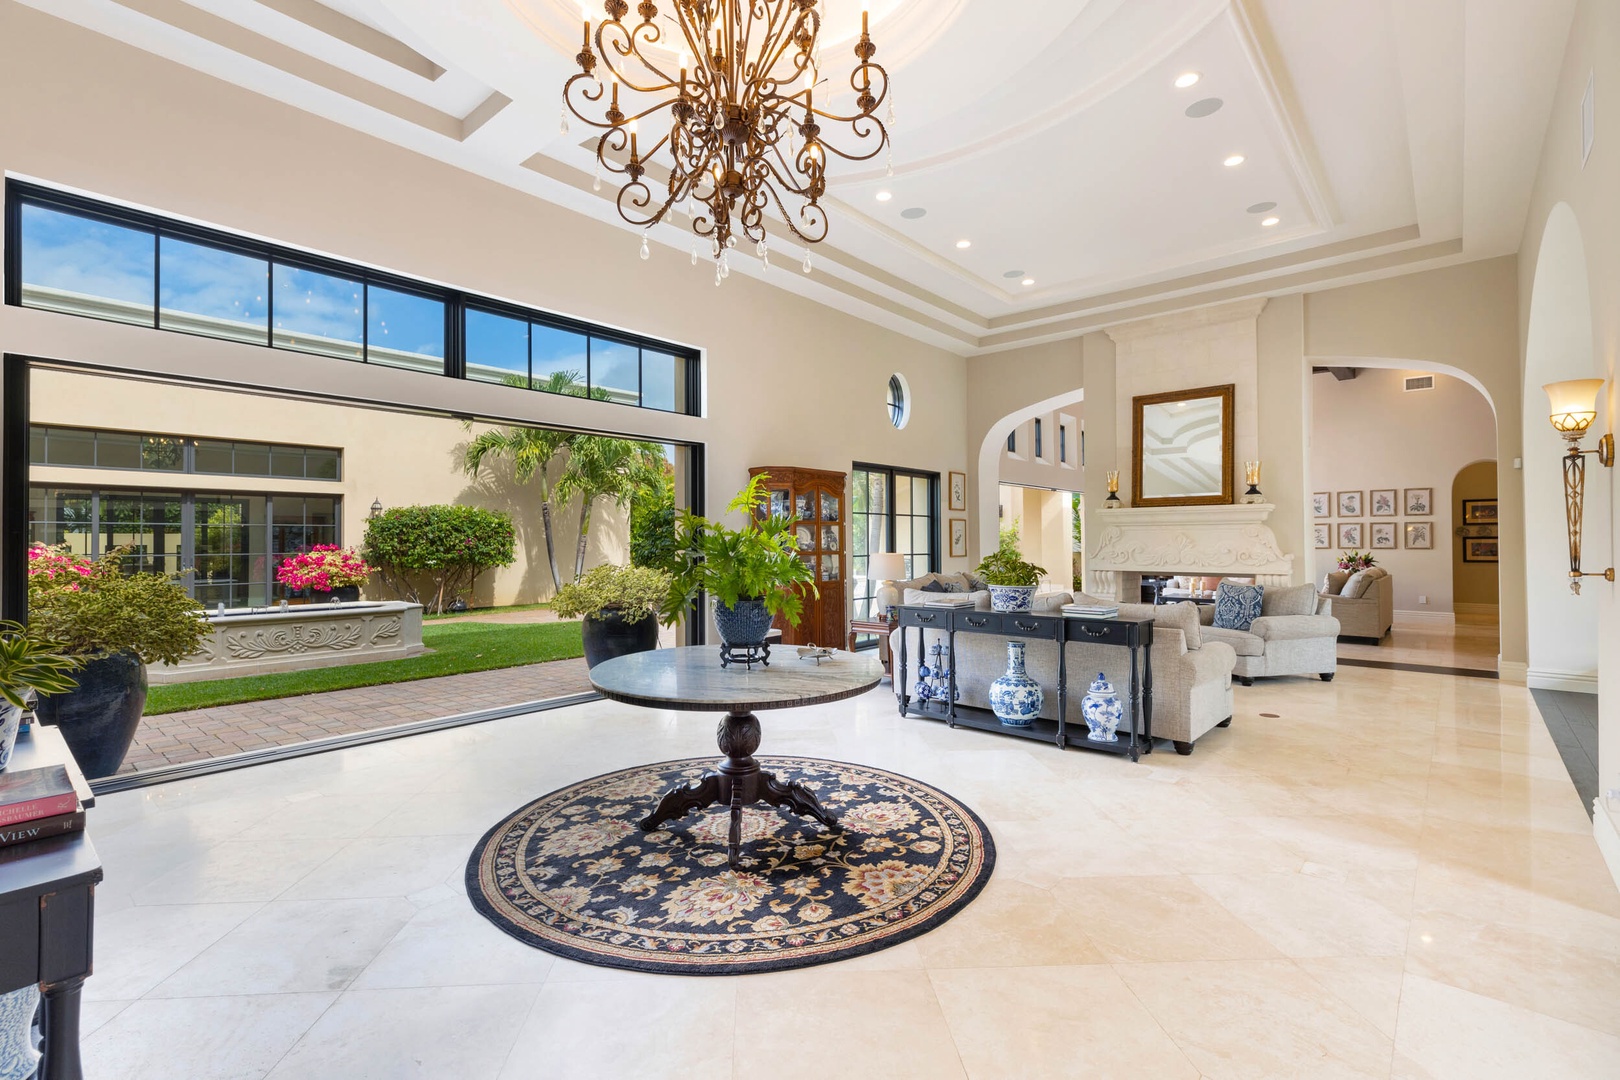 Honolulu Vacation Rentals, The Kahala Mansion - Step into the elegantly appointed foyer.